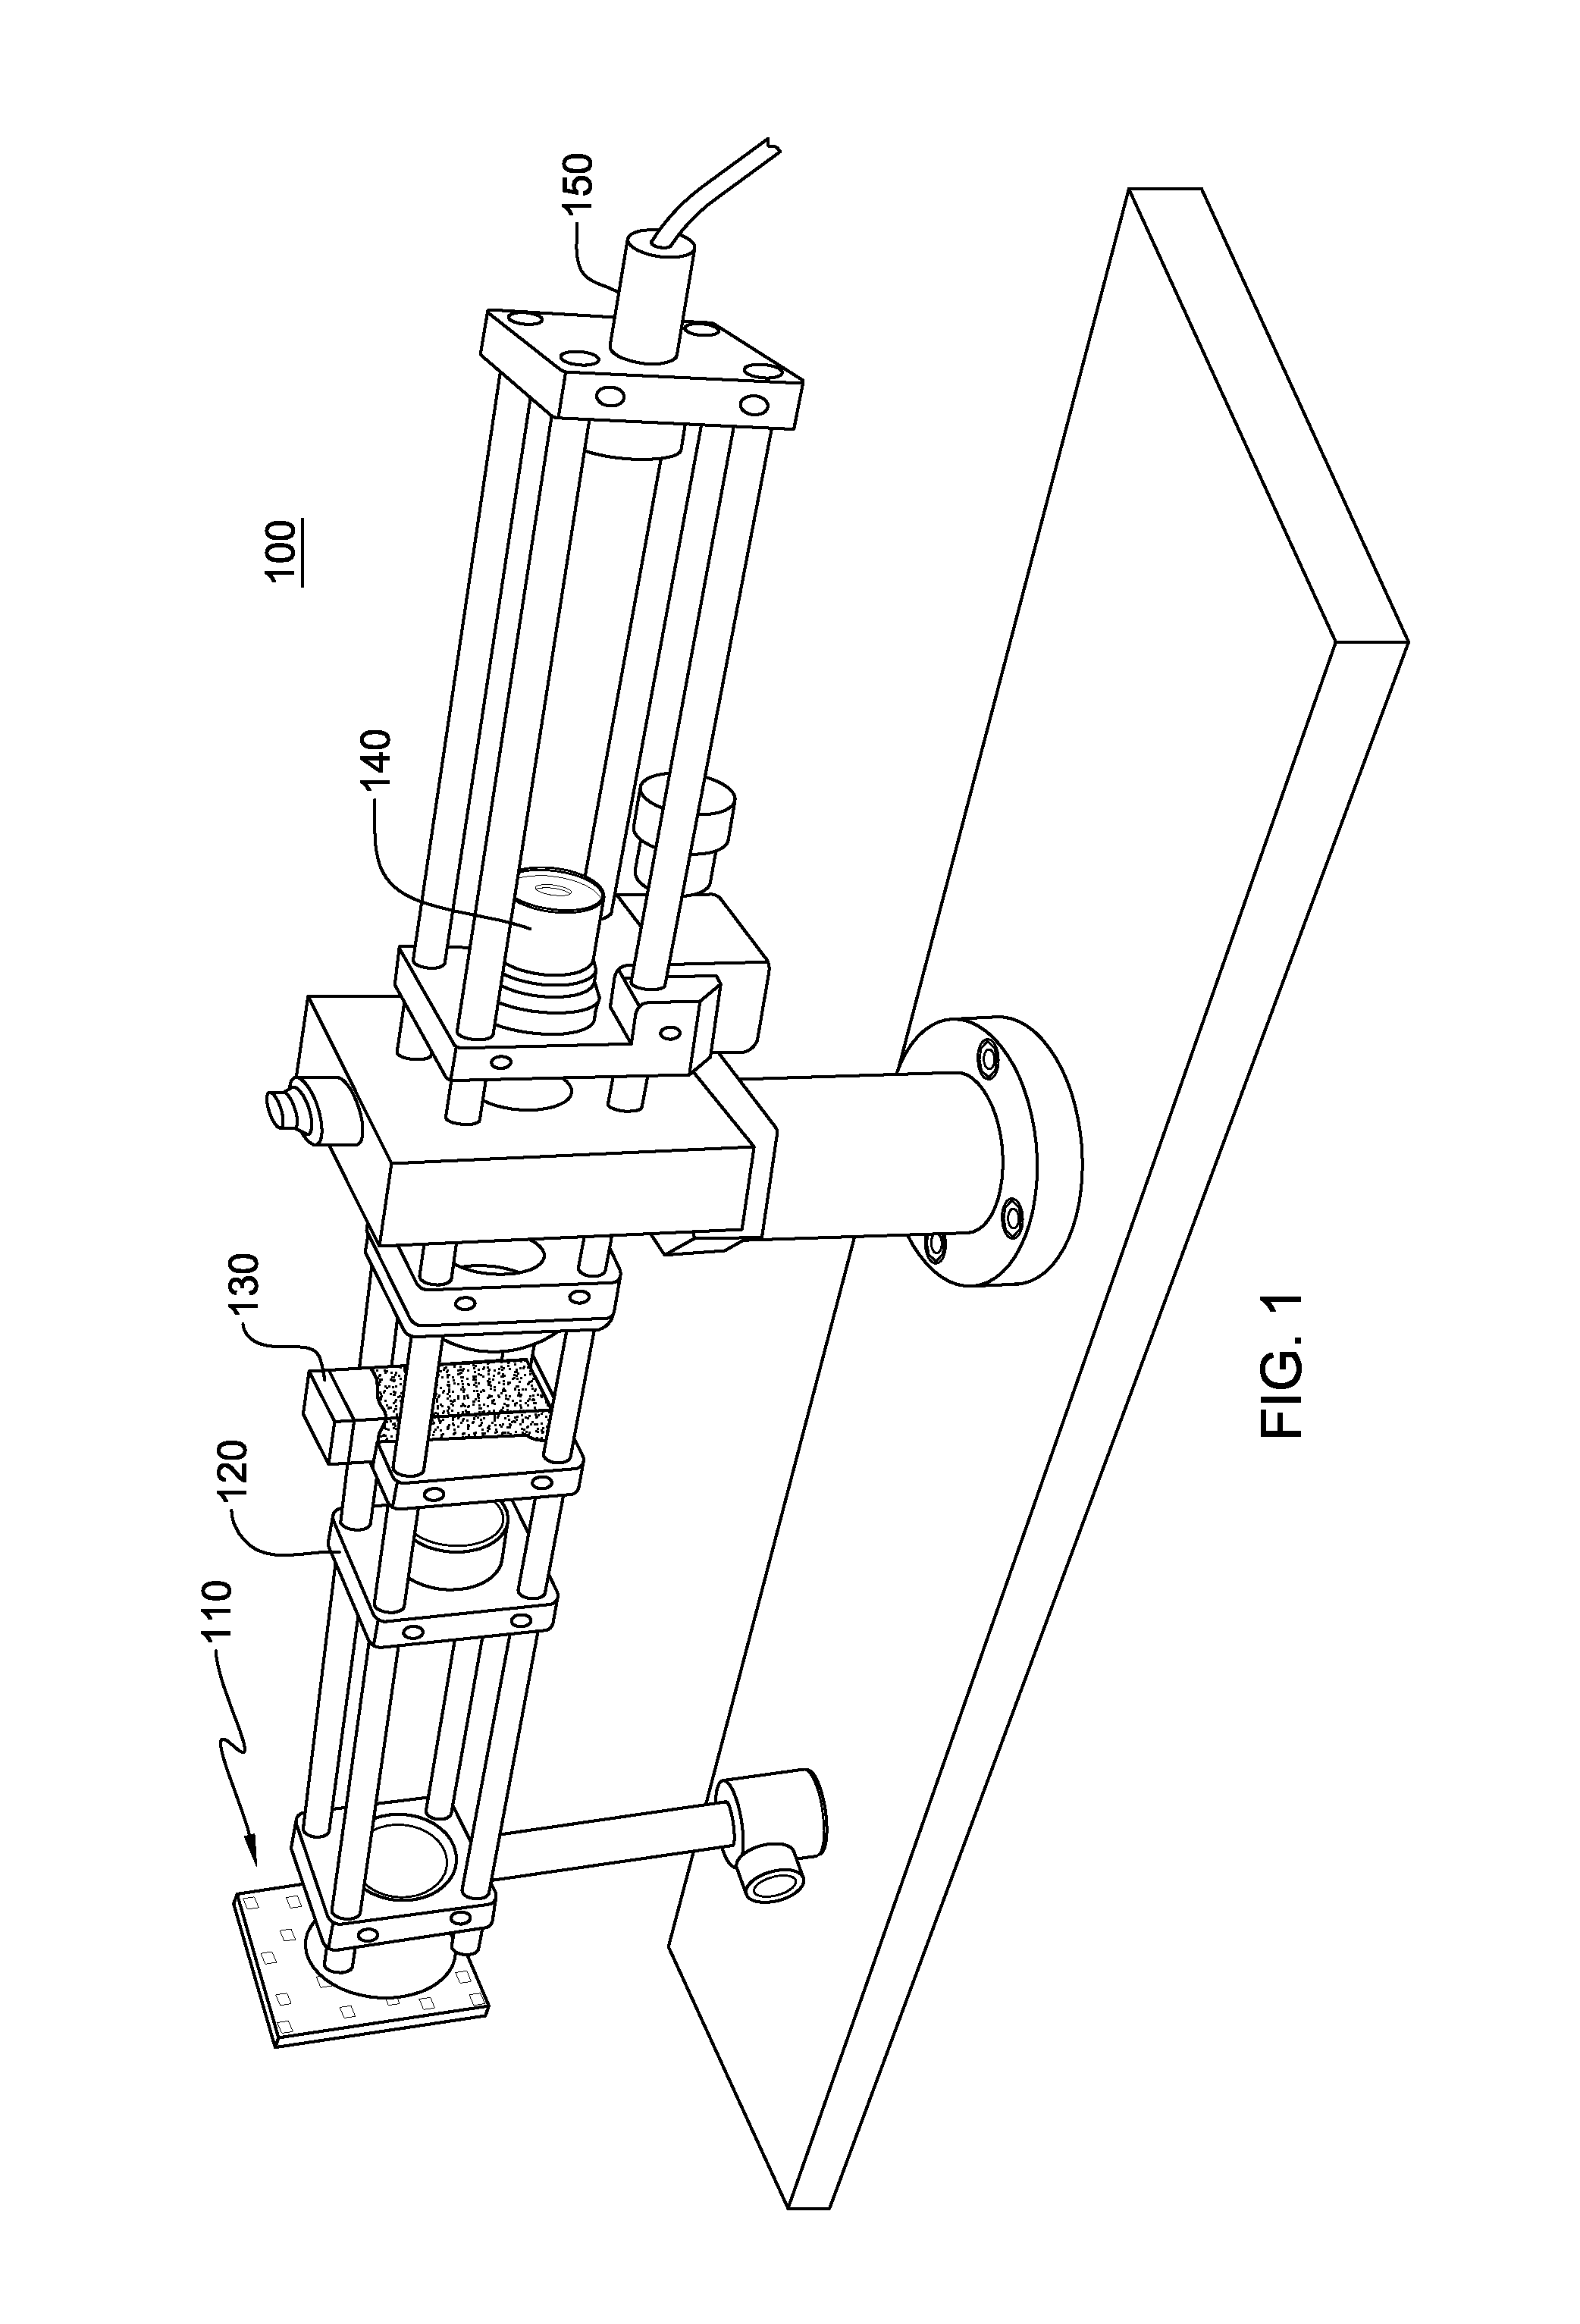 Digital holographic microscopy apparatus and method for clinical diagnostic hematology